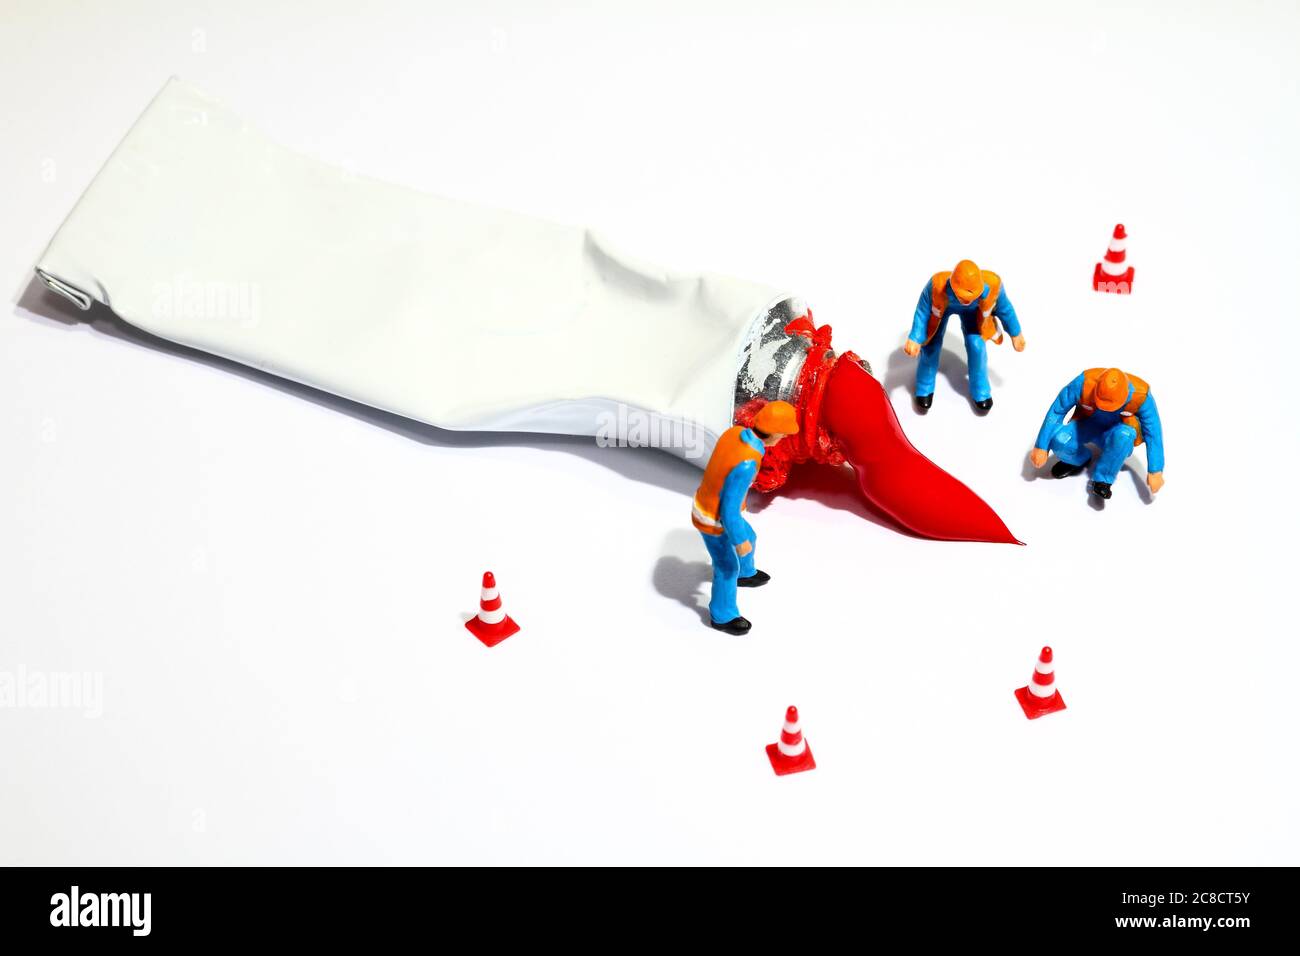 Miniature figure people investigating an artists red paint tube spillage Stock Photo